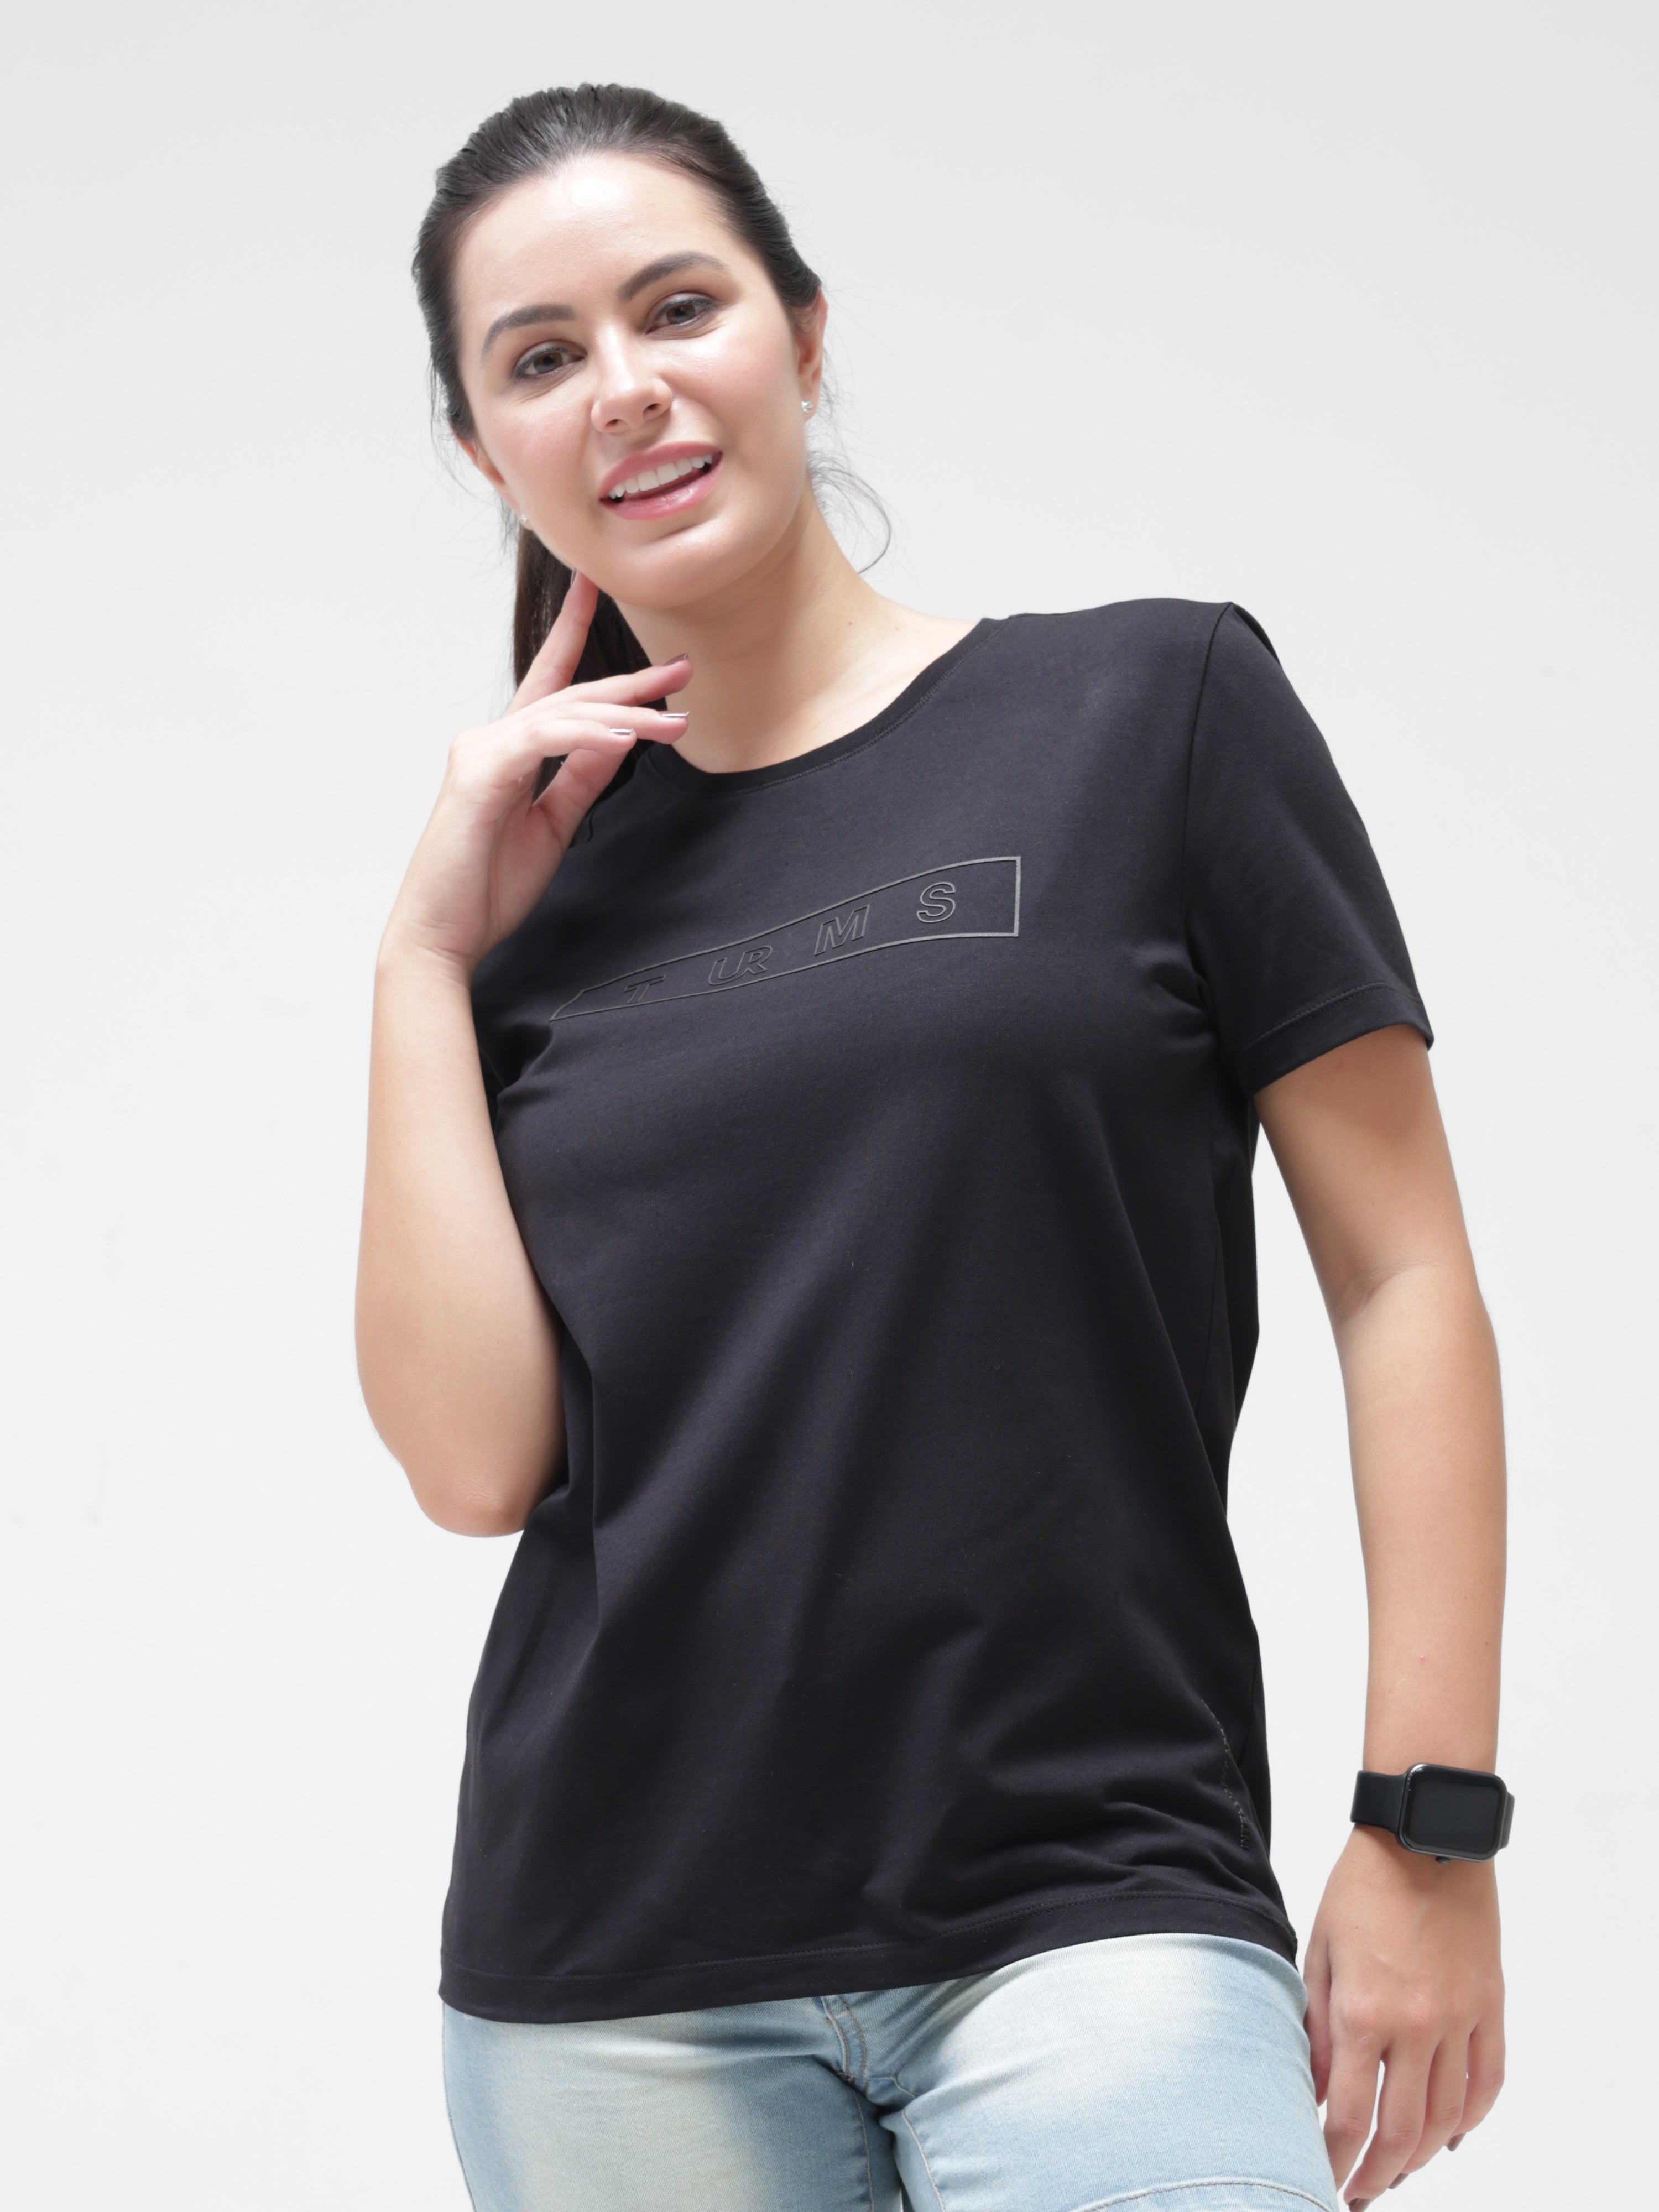 Woman wearing black round-neck Turms T-shirt, showcasing anti-stain, anti-odor, stretchable fabric. Intelligent apparel for a tailored fit.